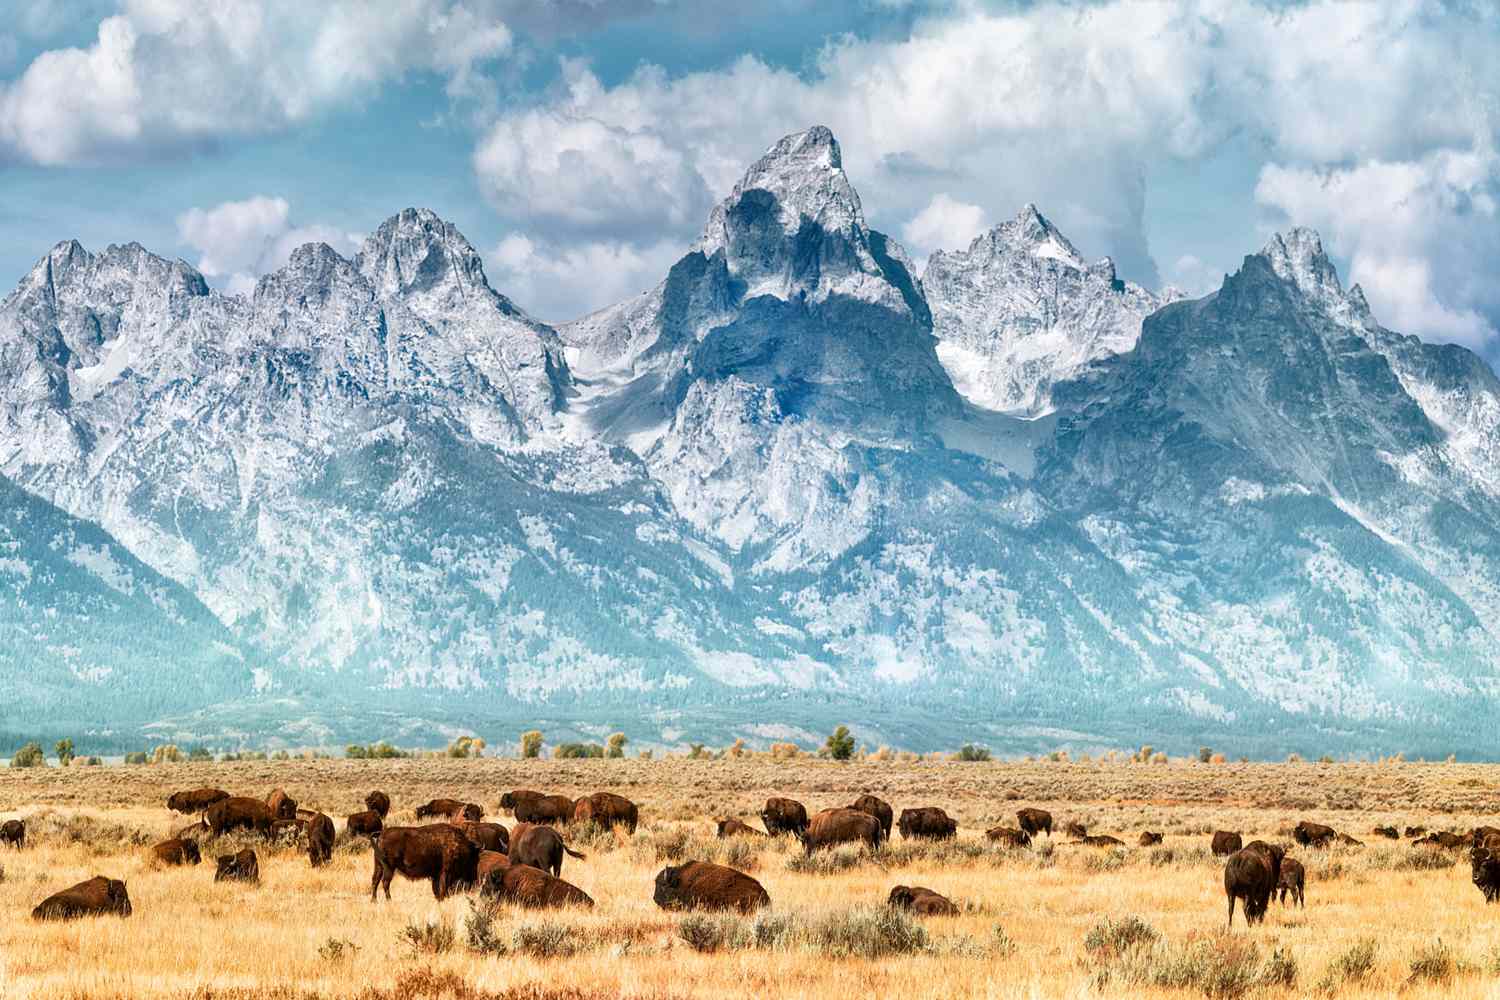 See Some of America's Best Wildlife With These Luxury Safaris Through the U.S.